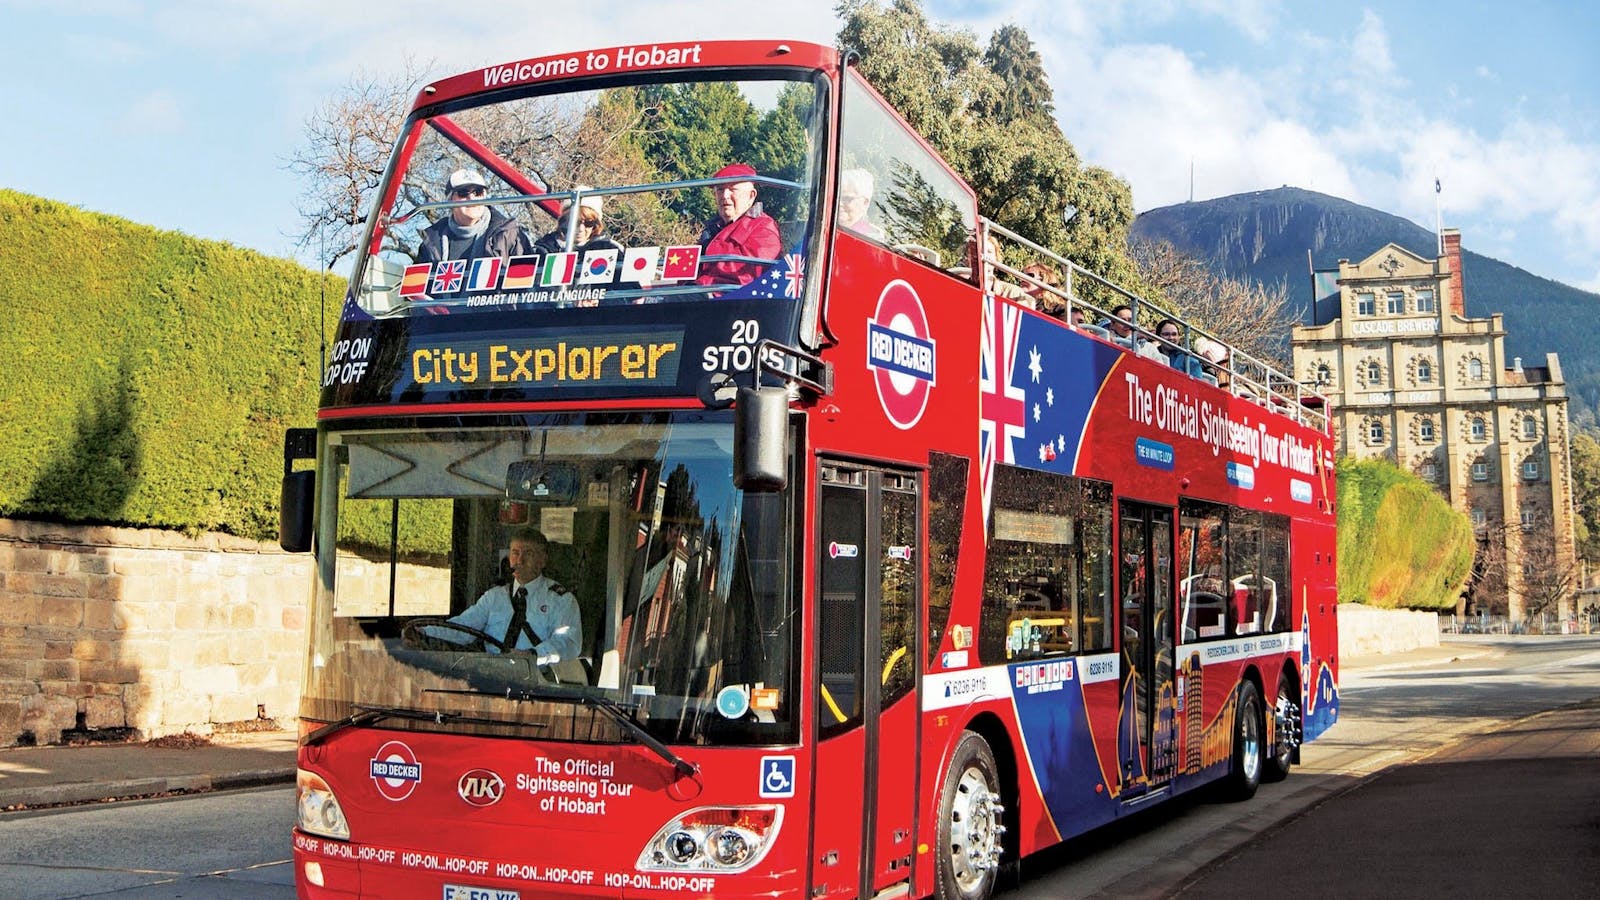 Red Decker - The Official Sightseeing Tour of Hobart